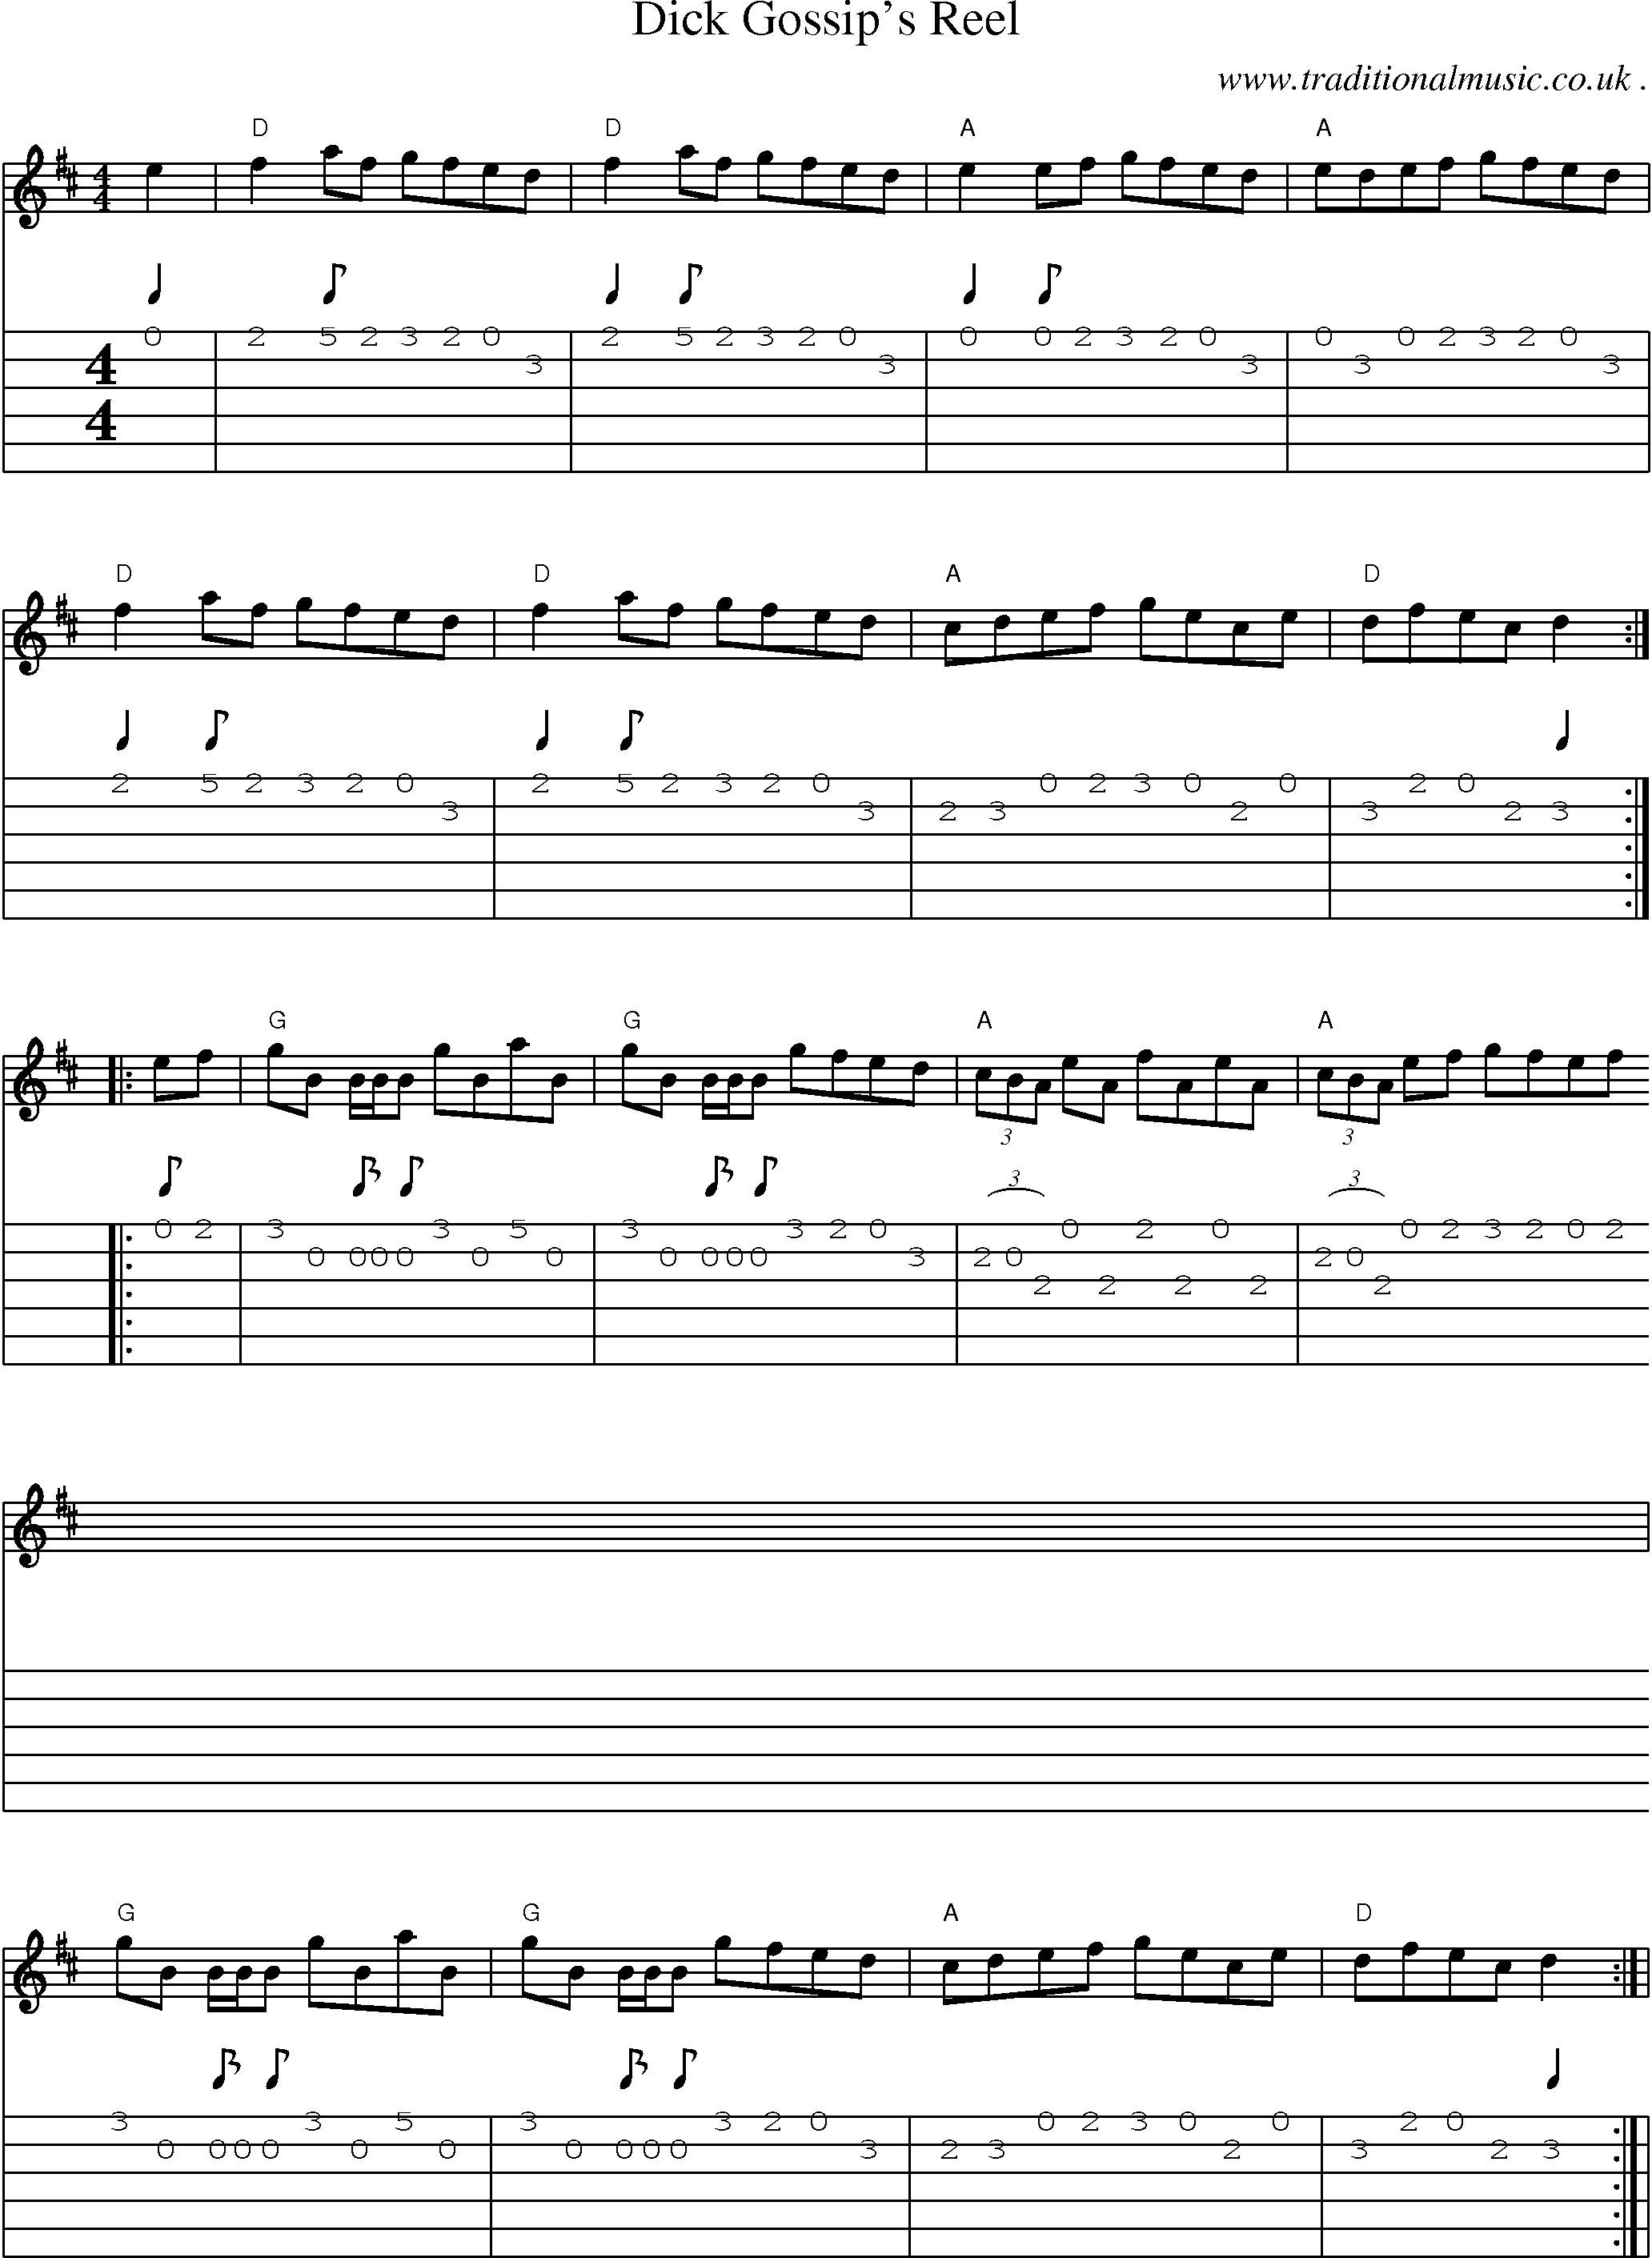 Sheet-Music and Guitar Tabs for Dick Gossips Reel